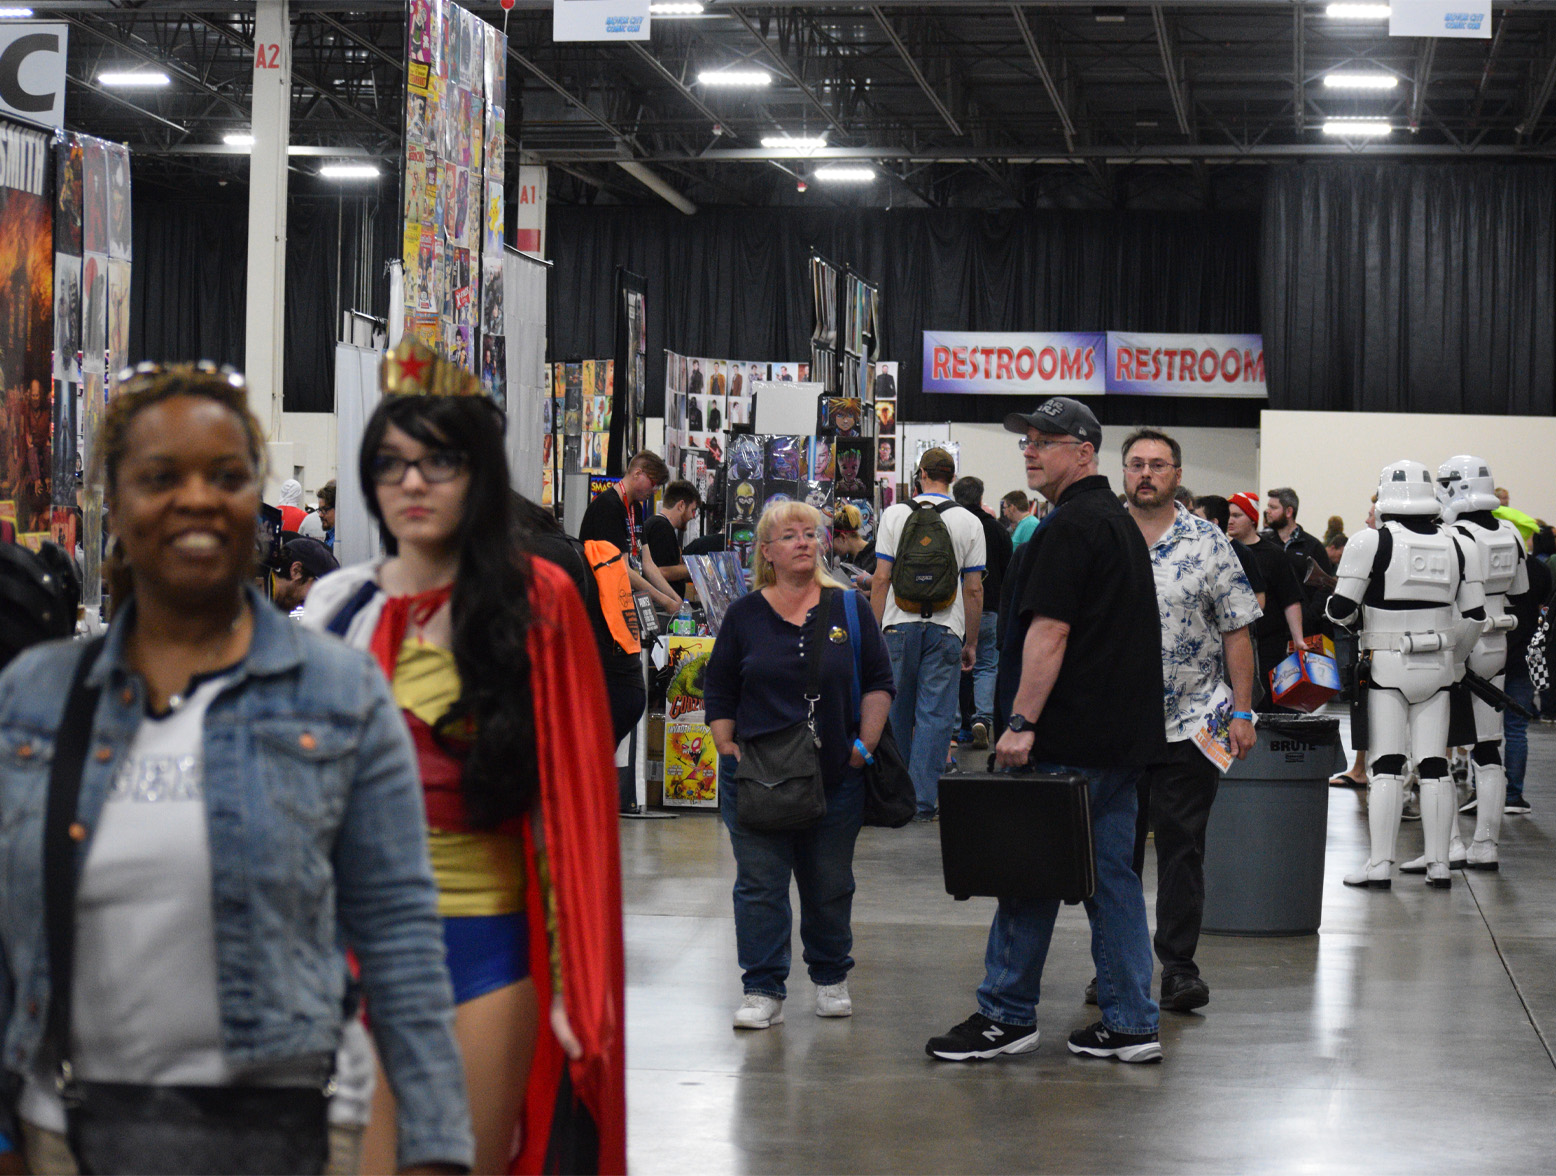 Two Wrestlers Will Be At Michigan's Motor City Comic Con The Roar